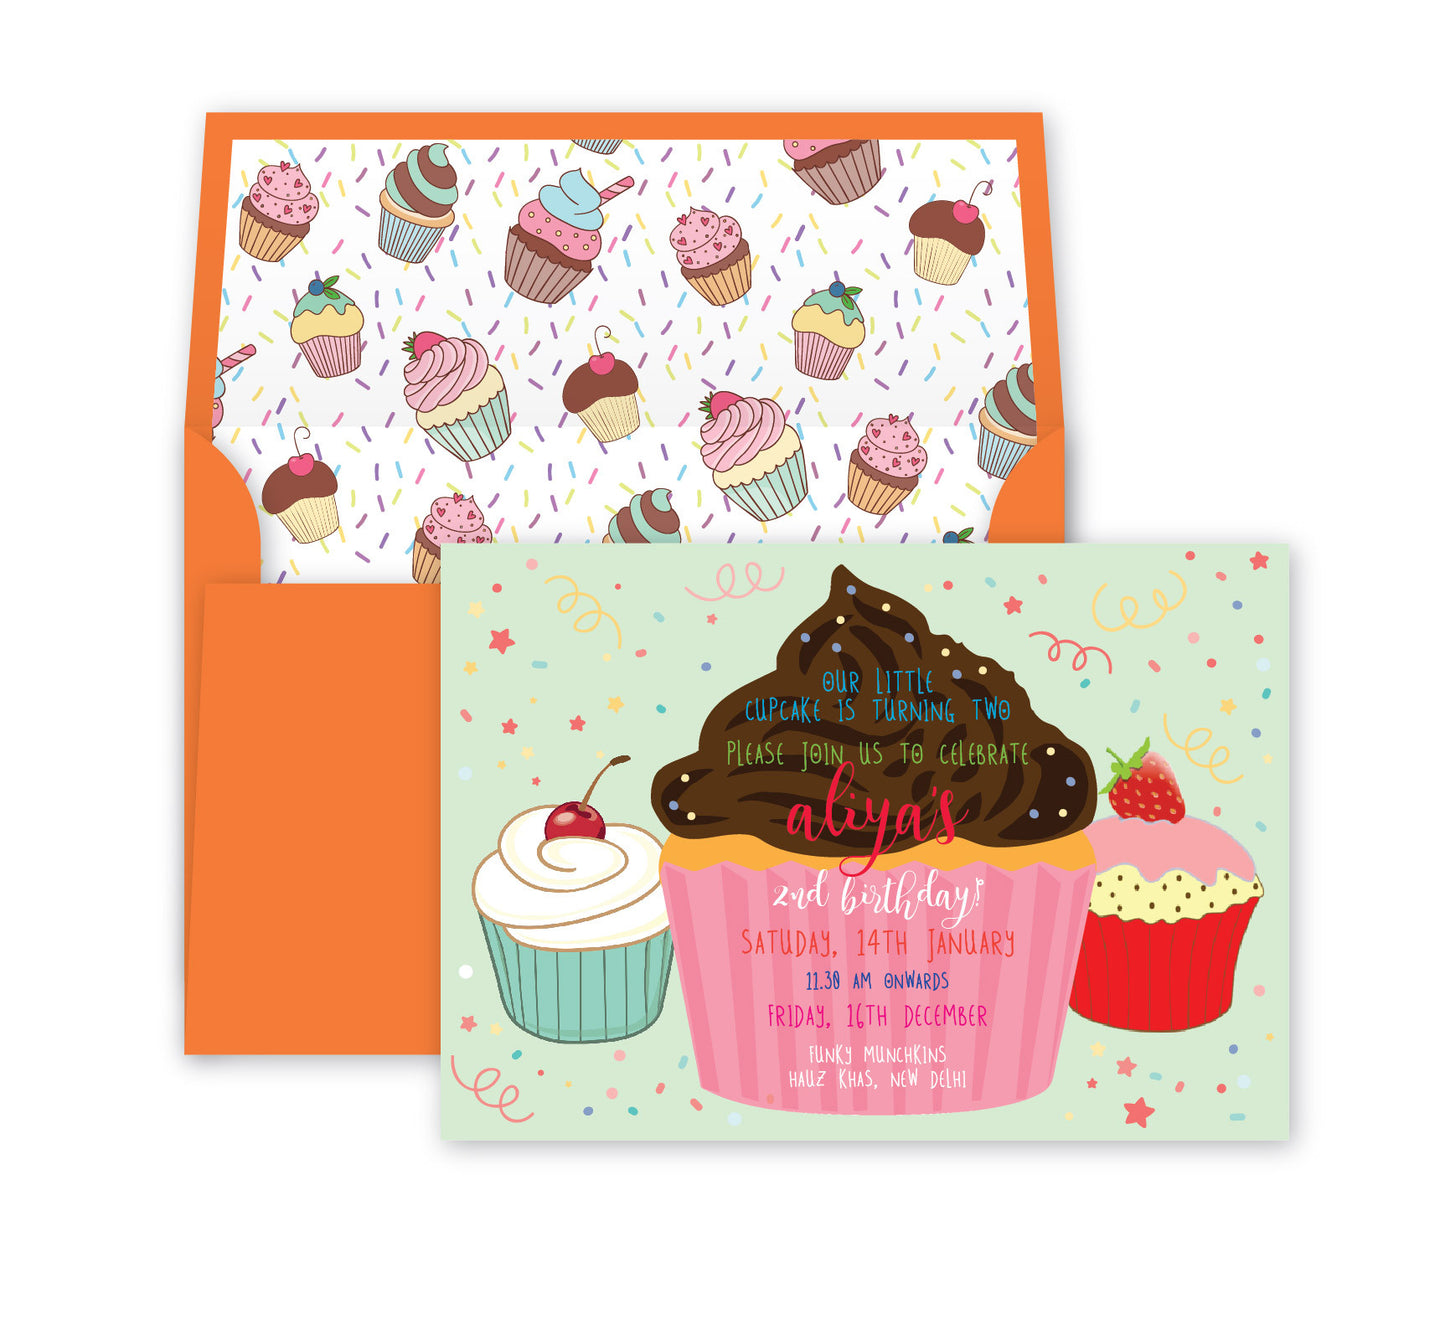 Load image into Gallery viewer, Cupcake Party
